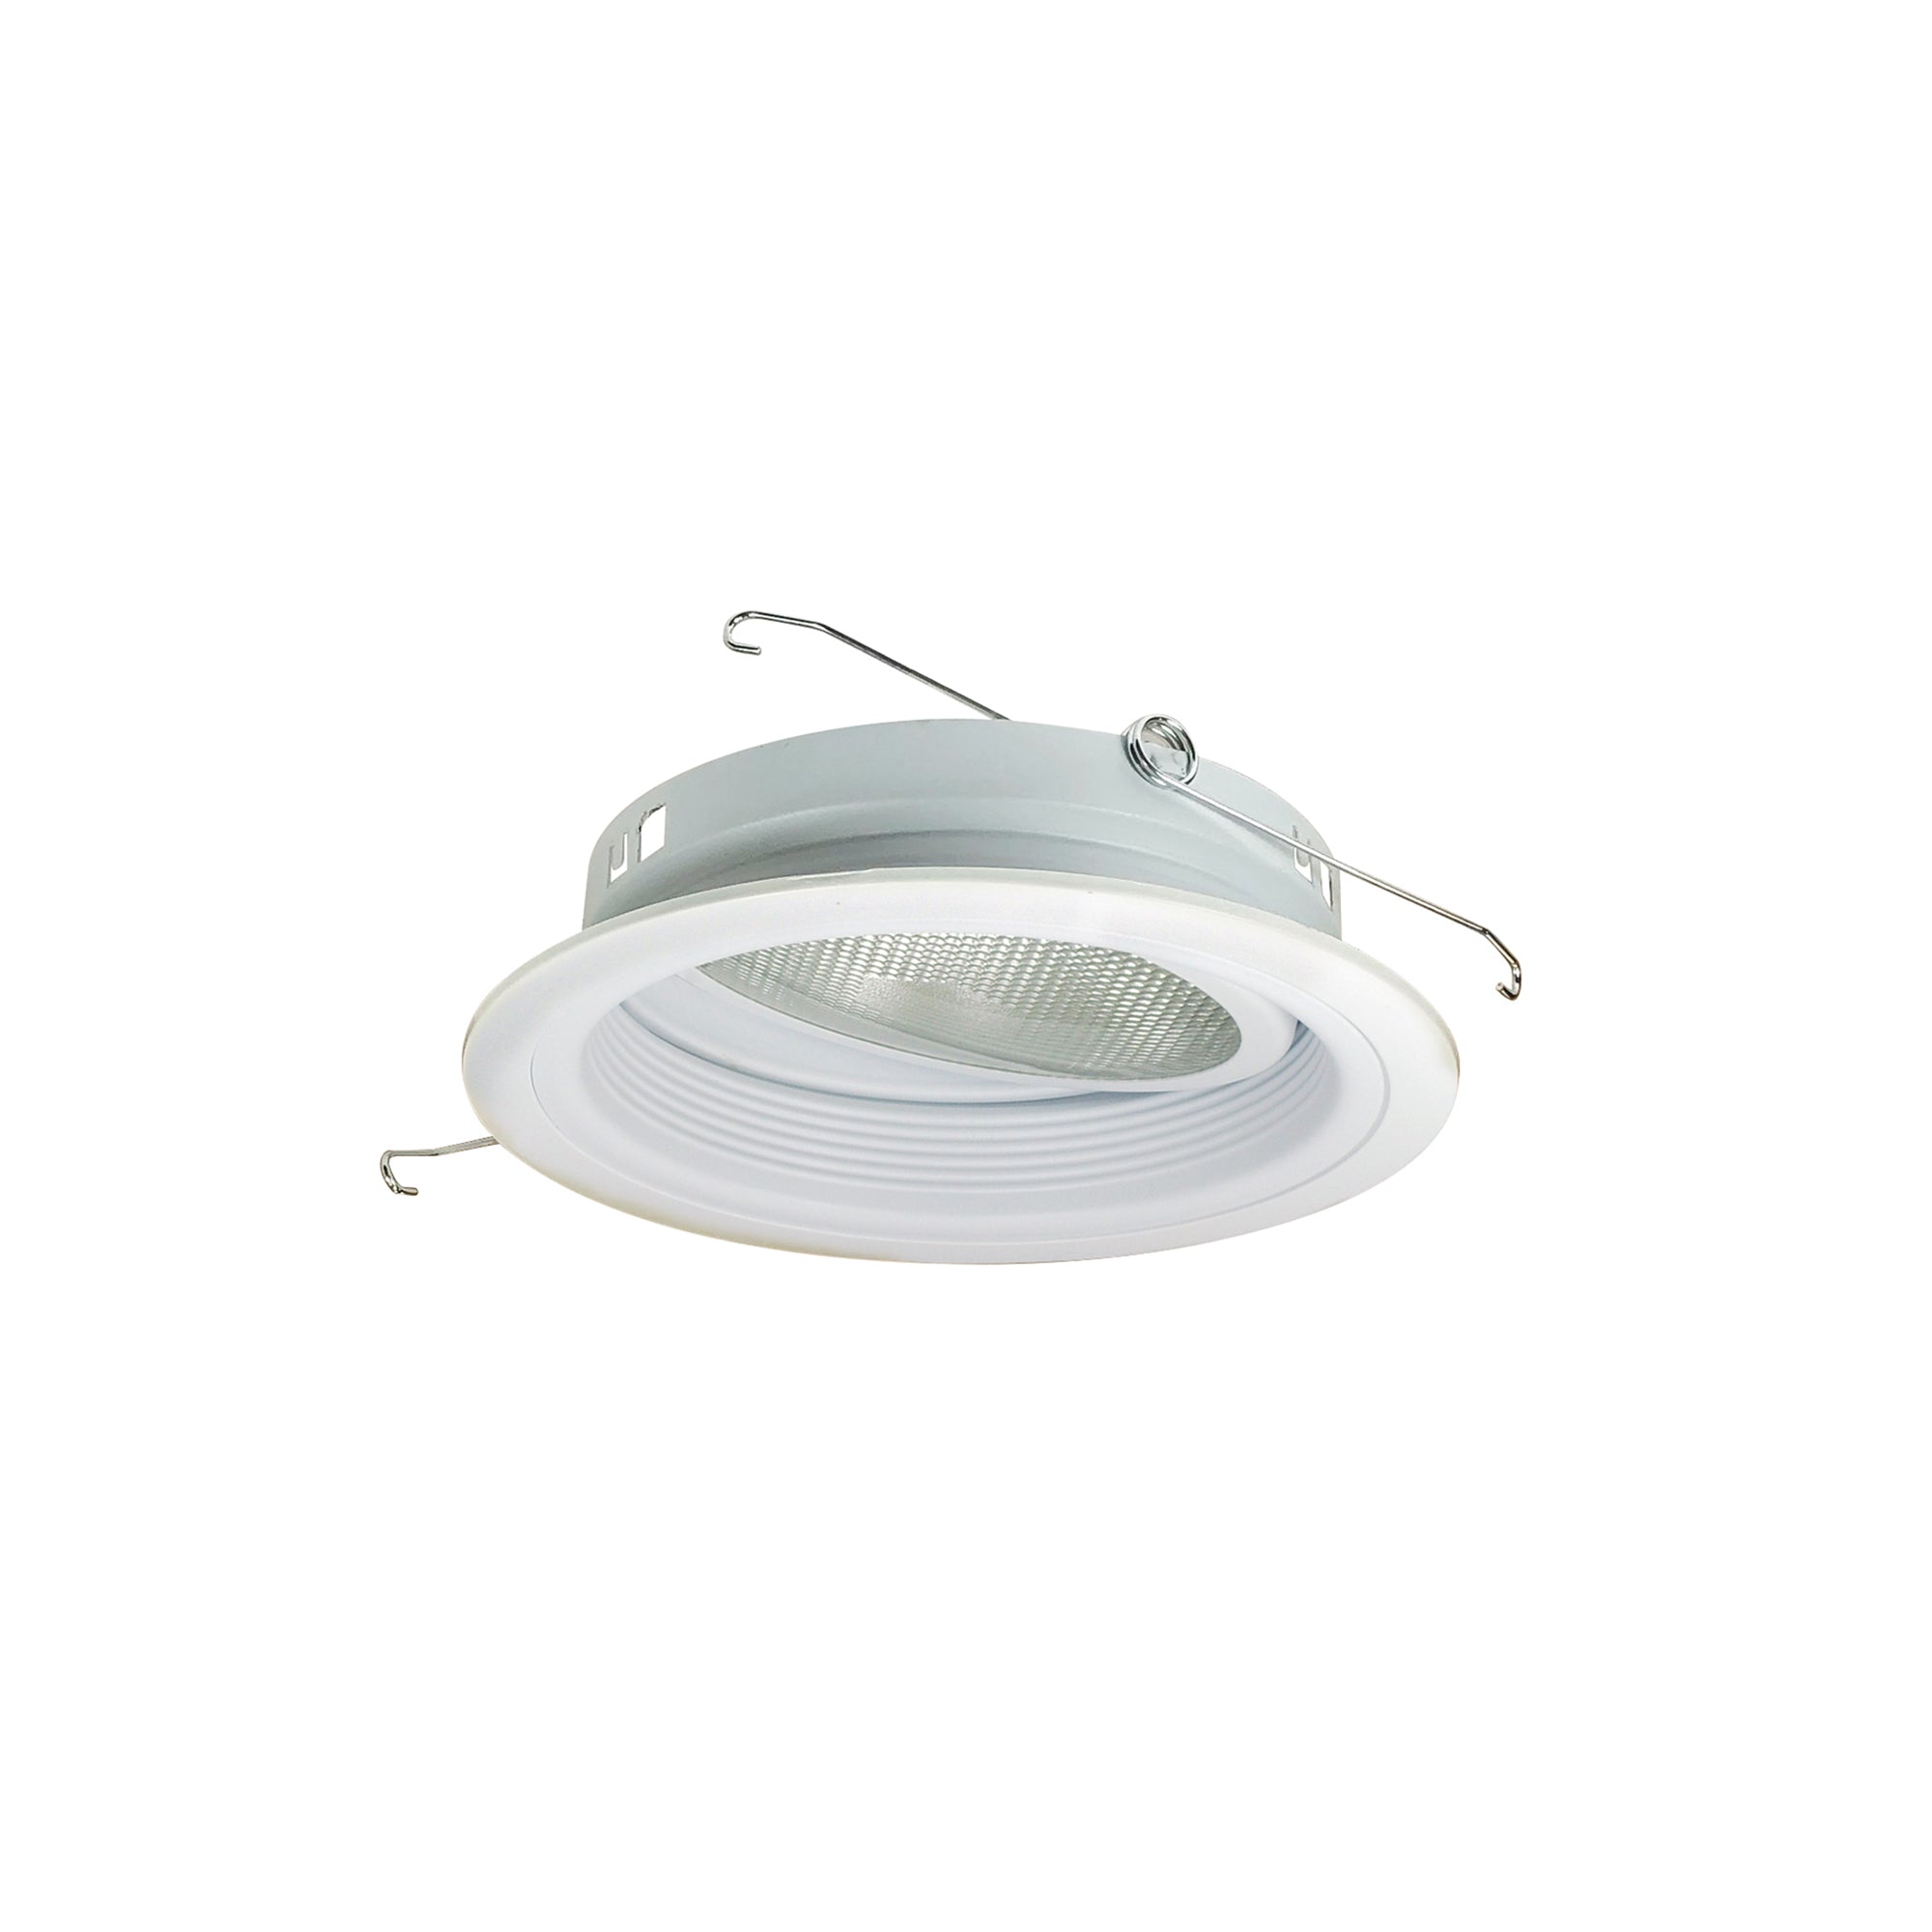 Nora Lighting NTM-54W - Recessed - 6 Inch PAR30 Stepped Baffle w/ Gimbal Ring, White